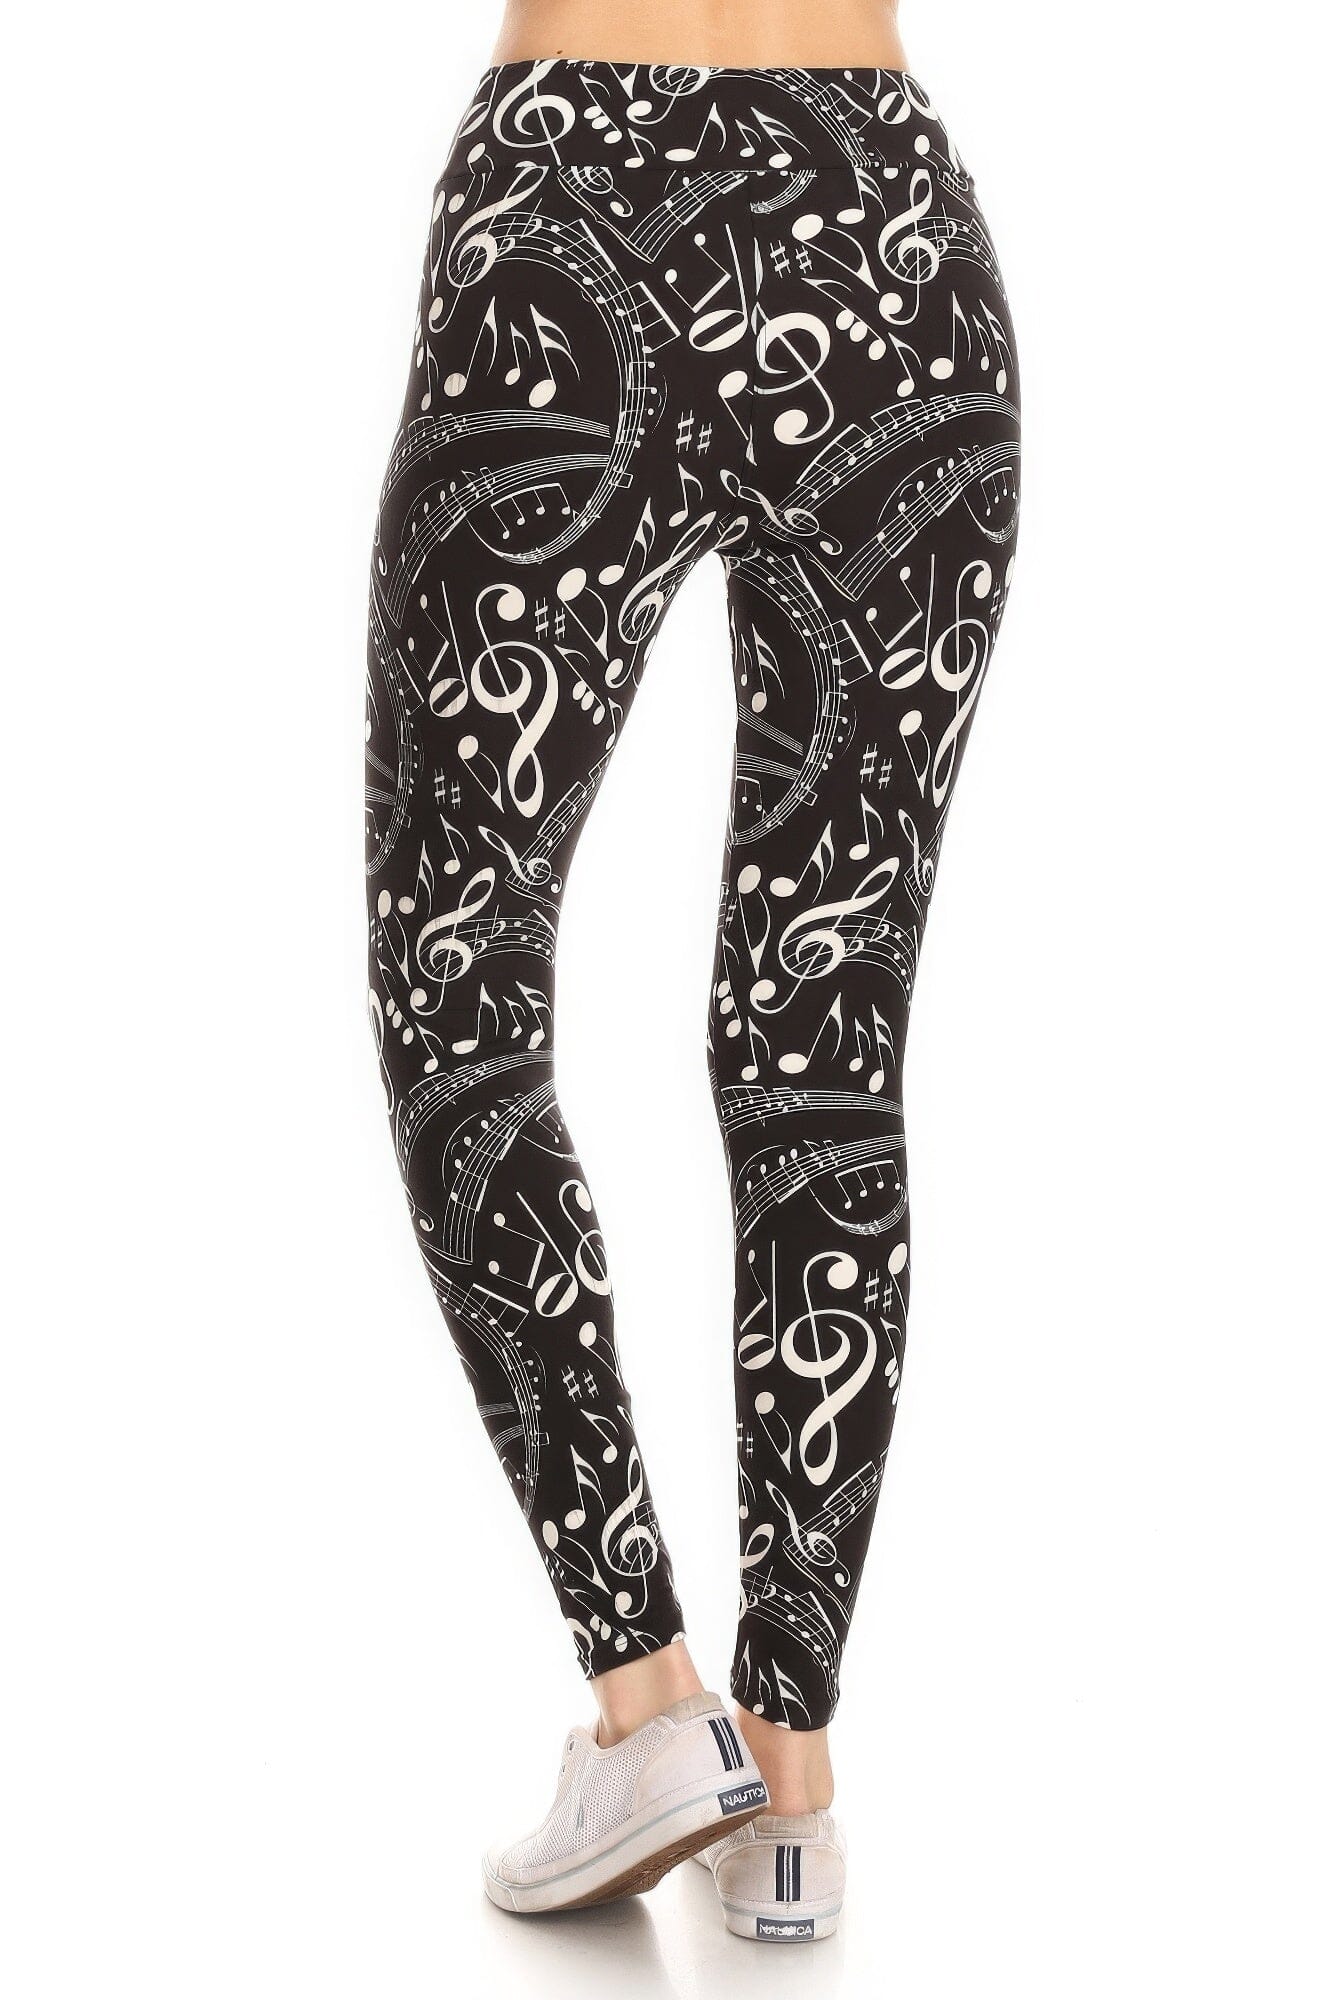 Yoga Style Banded Lined Music Note Print In A Slim Fitting Style With A Banded High Waist Full Length Leggings Pants jehouze 